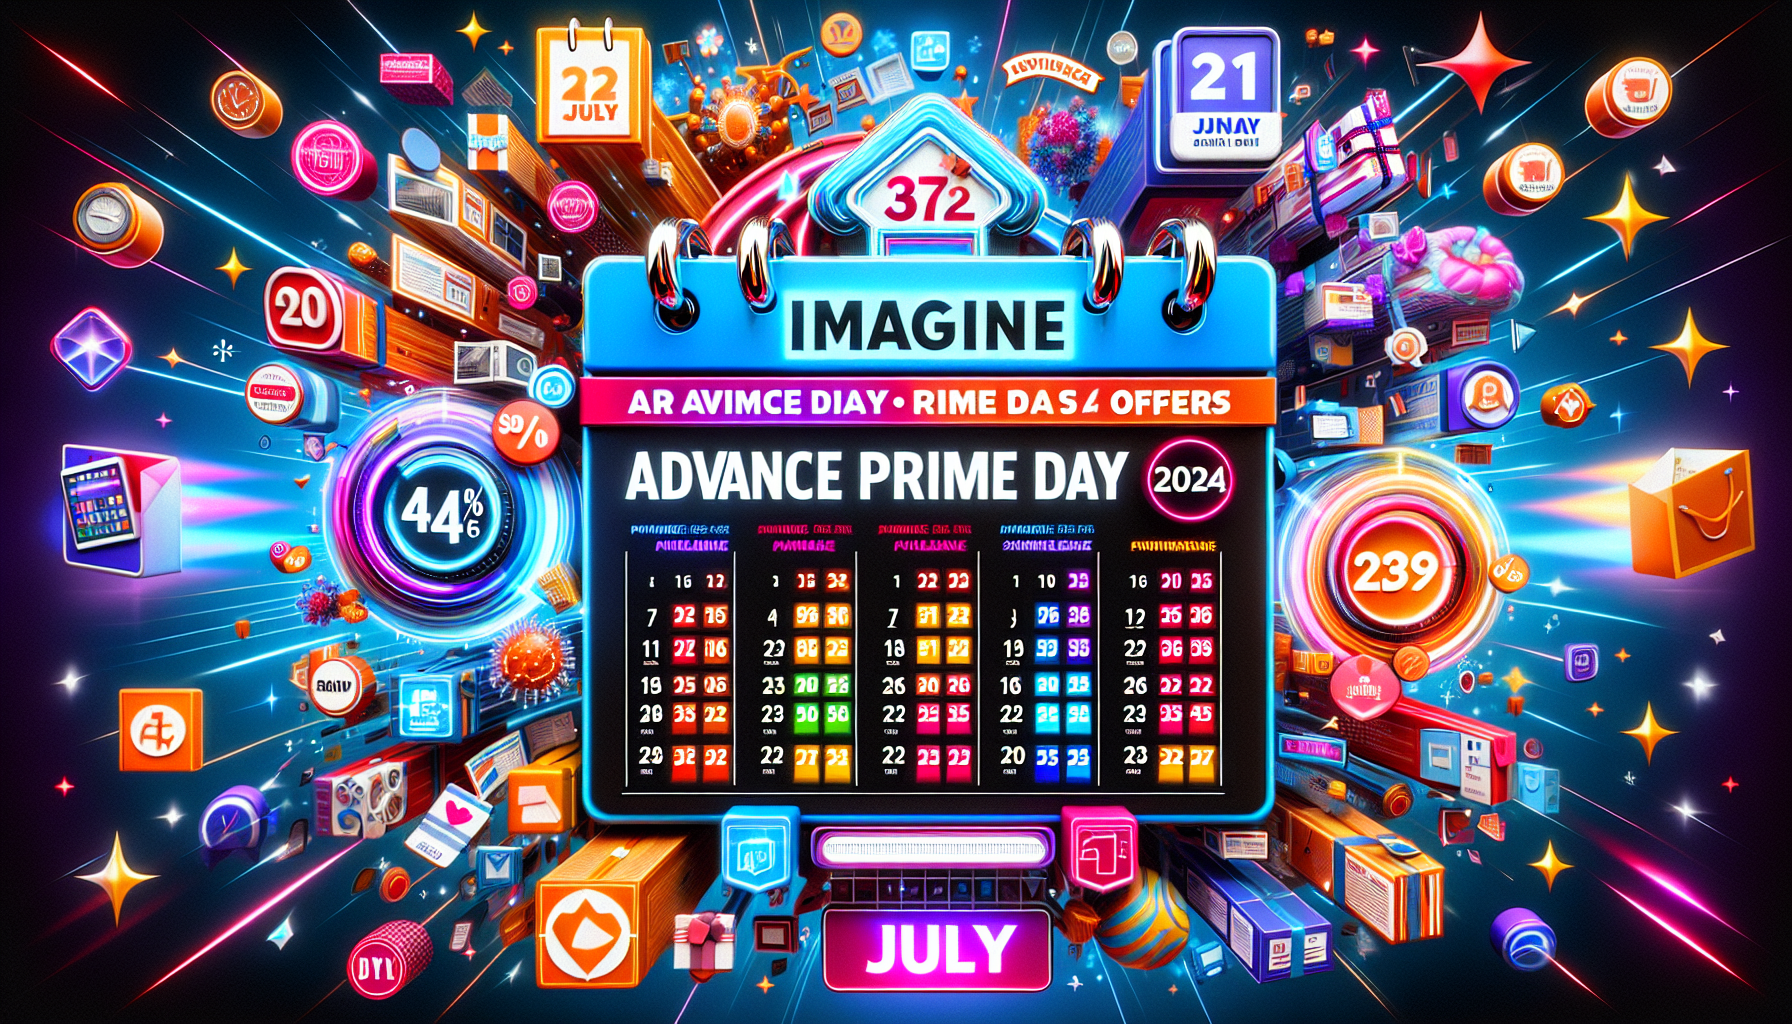 Advance Prime Day 2024 Offers: Leading Discounts Accessible Before Amazon's July Event